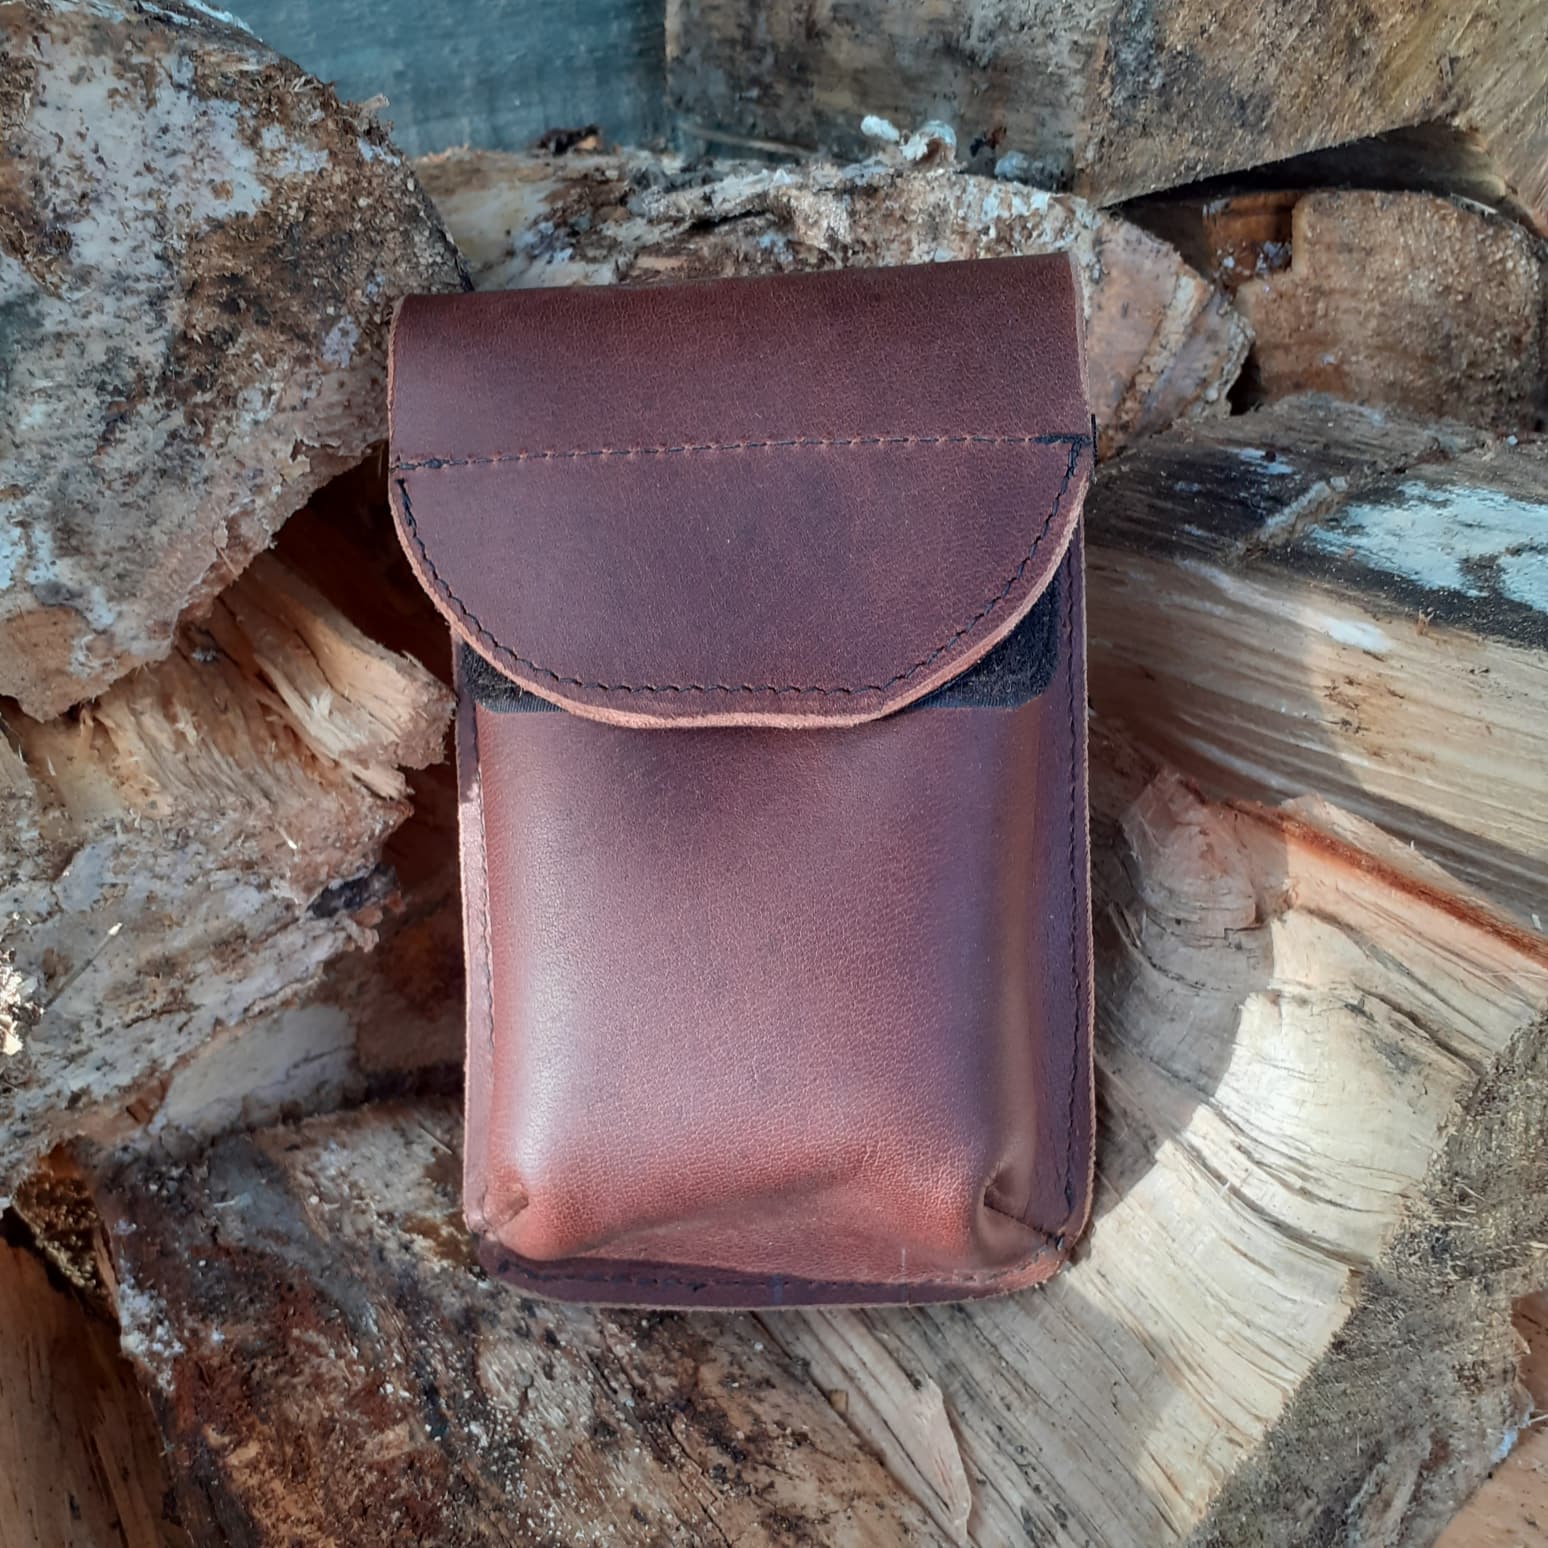 image of leather phone pouch on a firewood pile